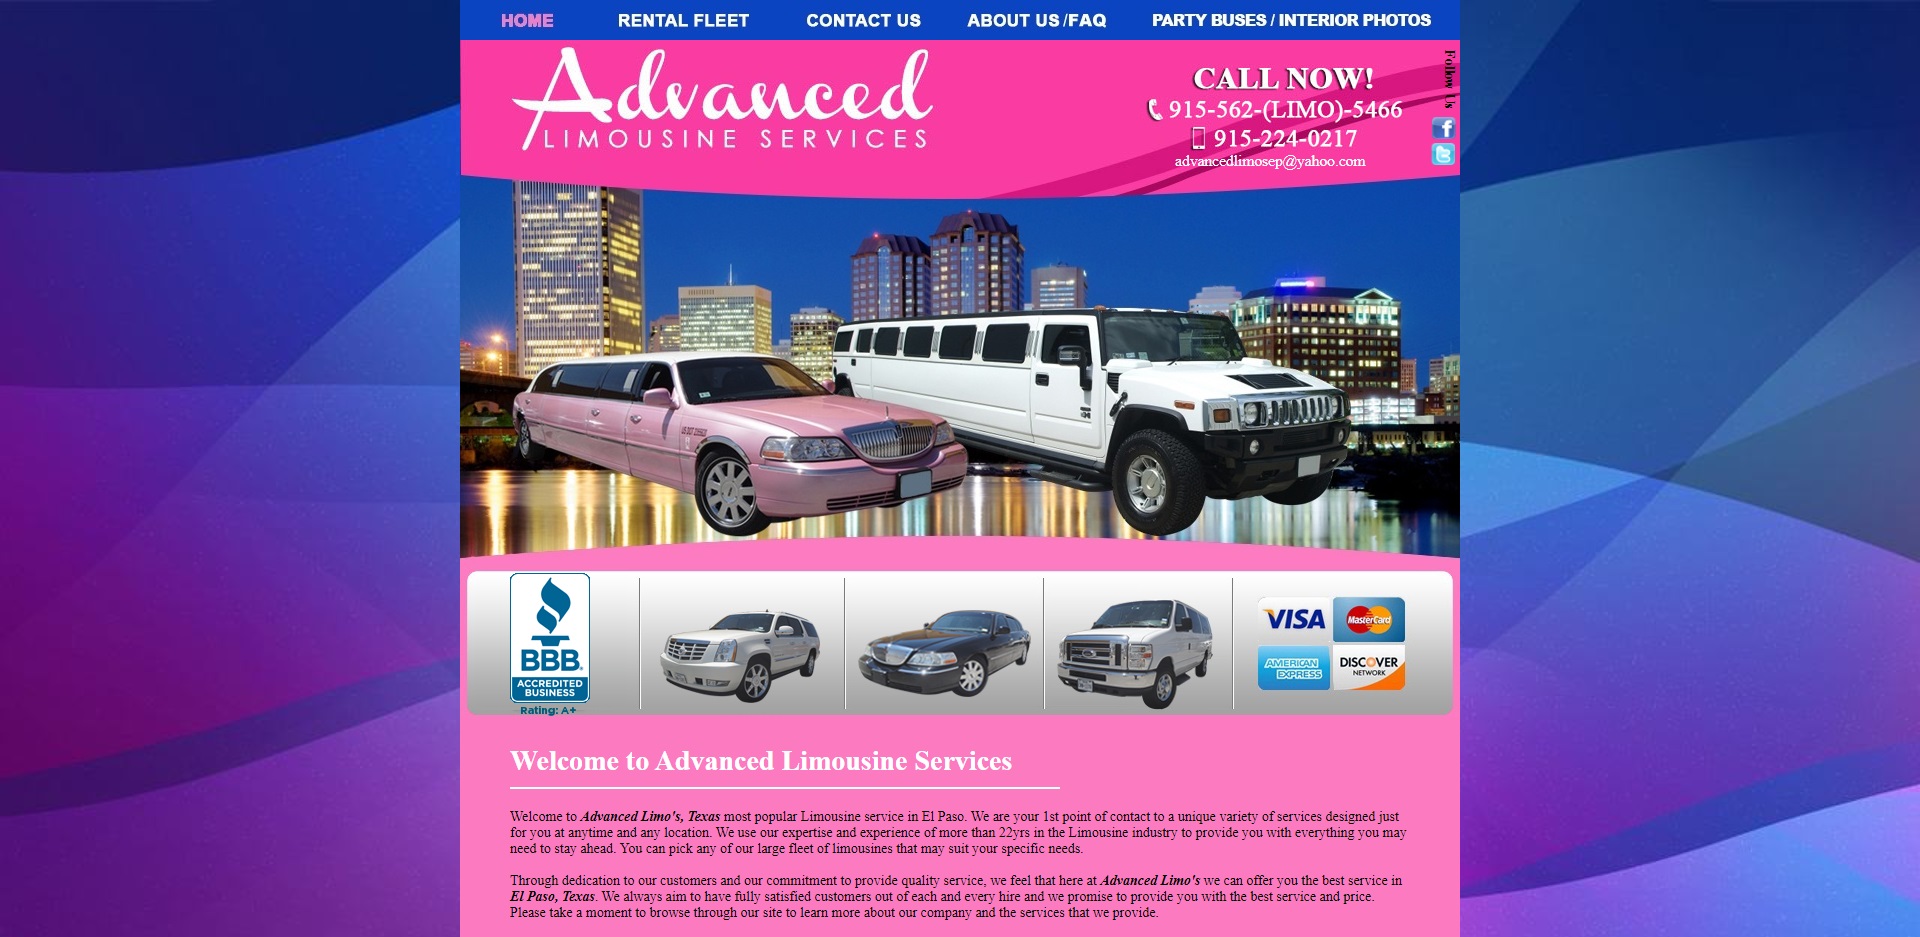 The Best Limo for Hire in El Paso, TX